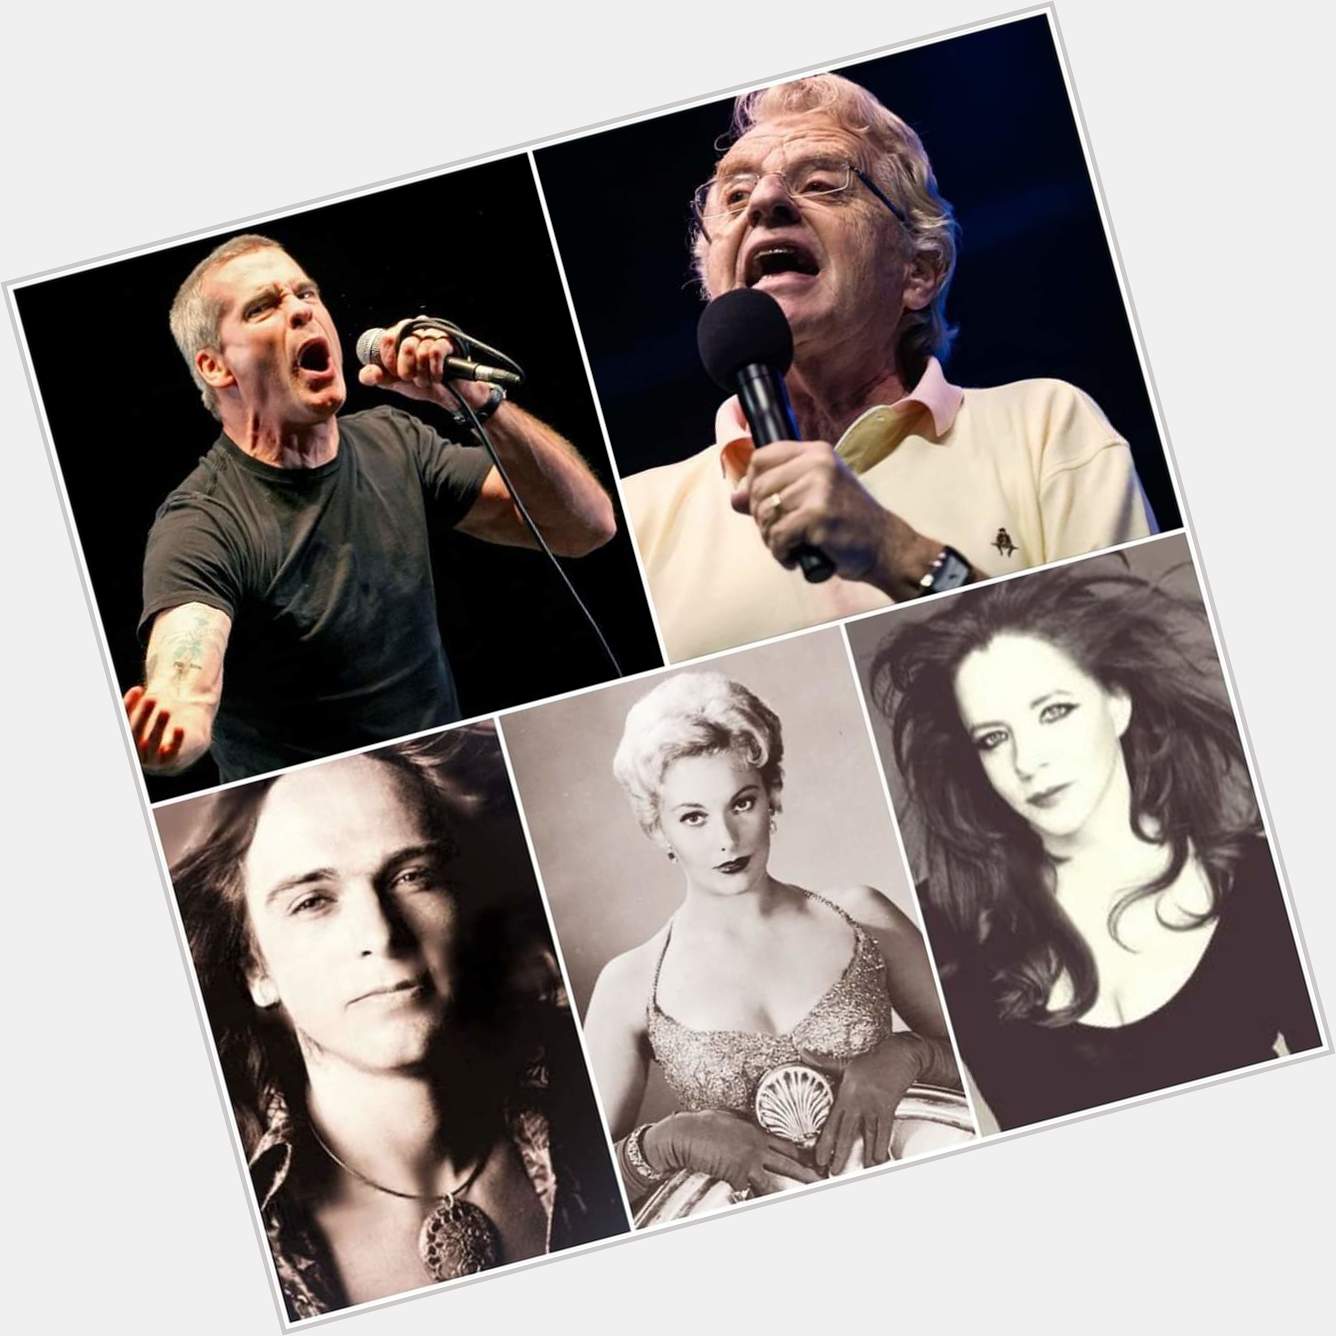 Happy Birthday to Henry Rollins, Jerry Springer, Peter Gabriel, Kim Novak, and Stockard Channing! 